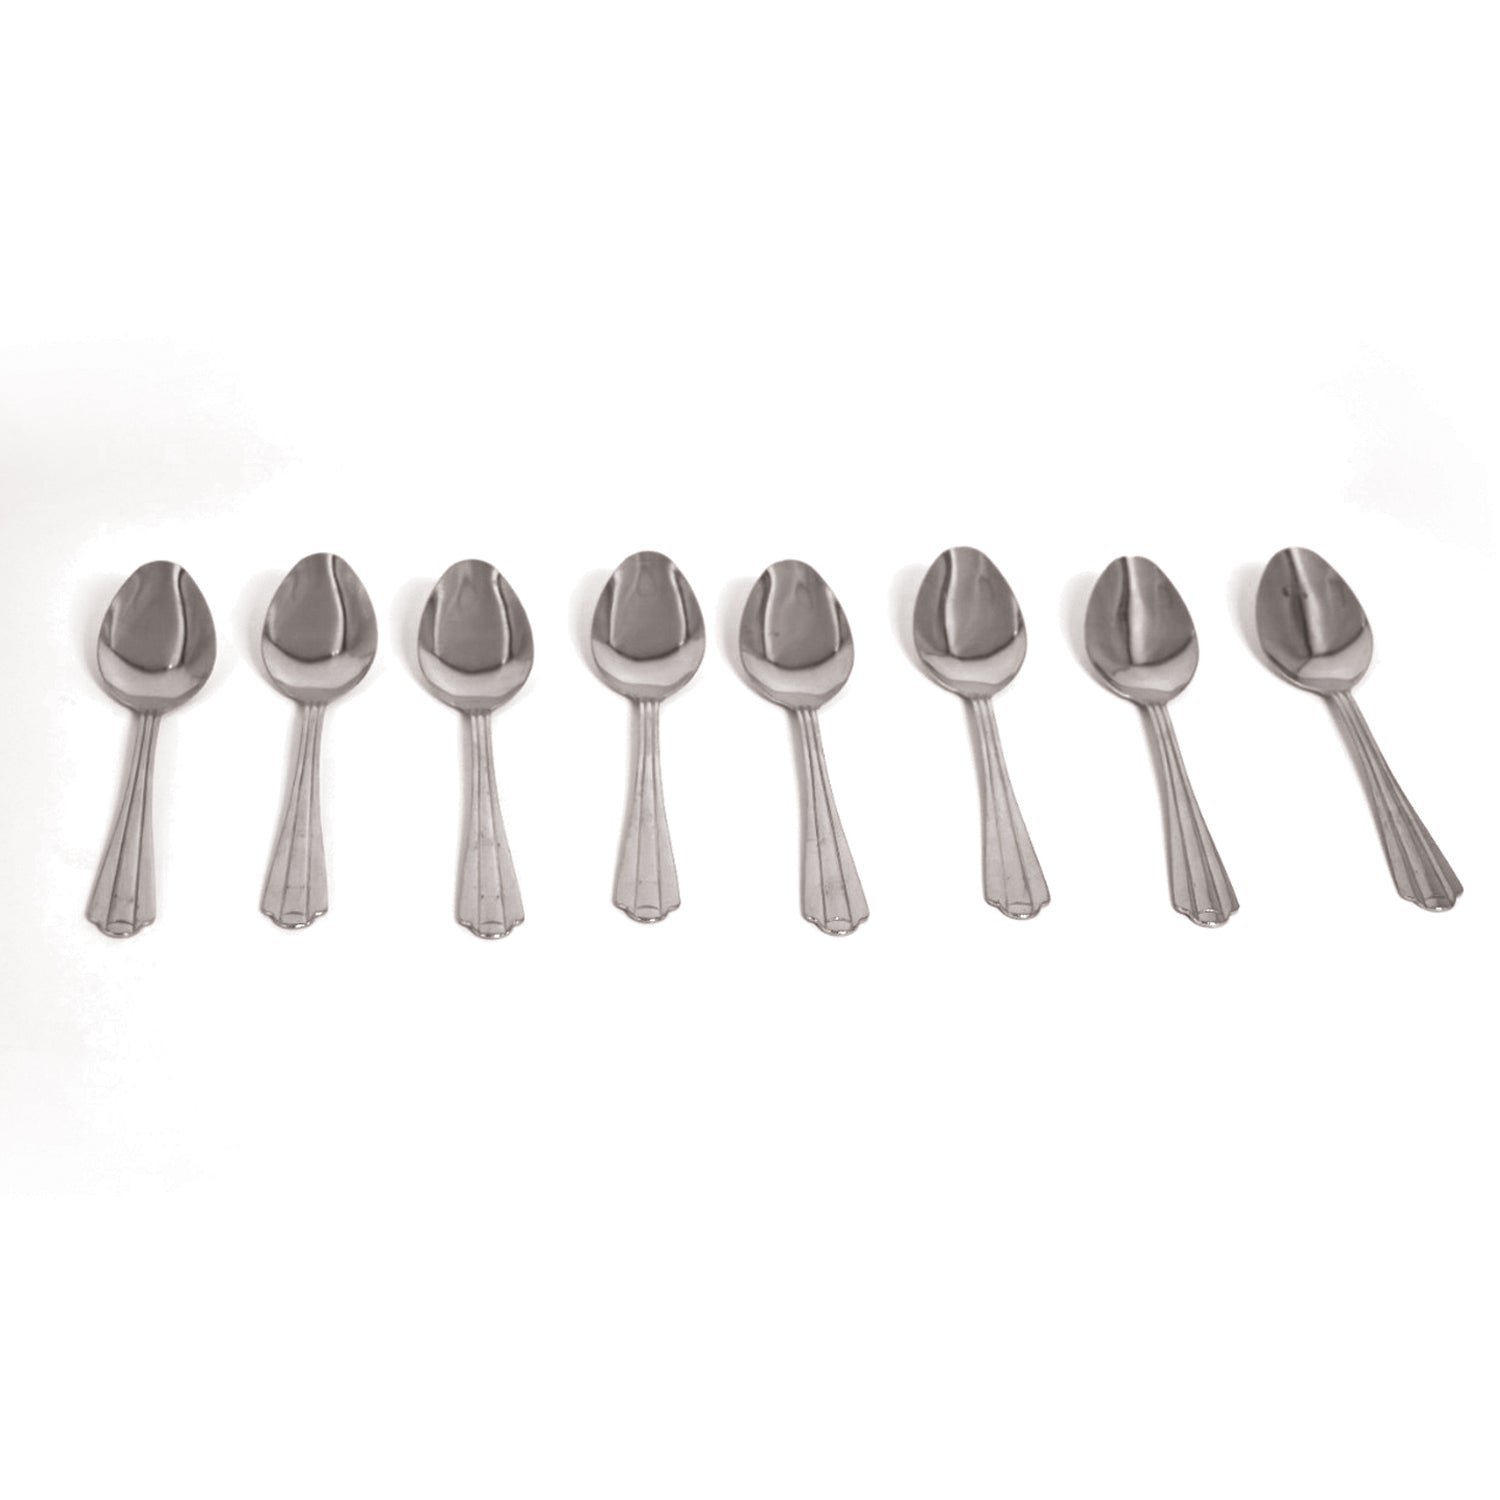 2779 (set of 8pc) small tea spoon Set for Tea, Coffee, Sugar & Spices, Small Spoons DeoDap